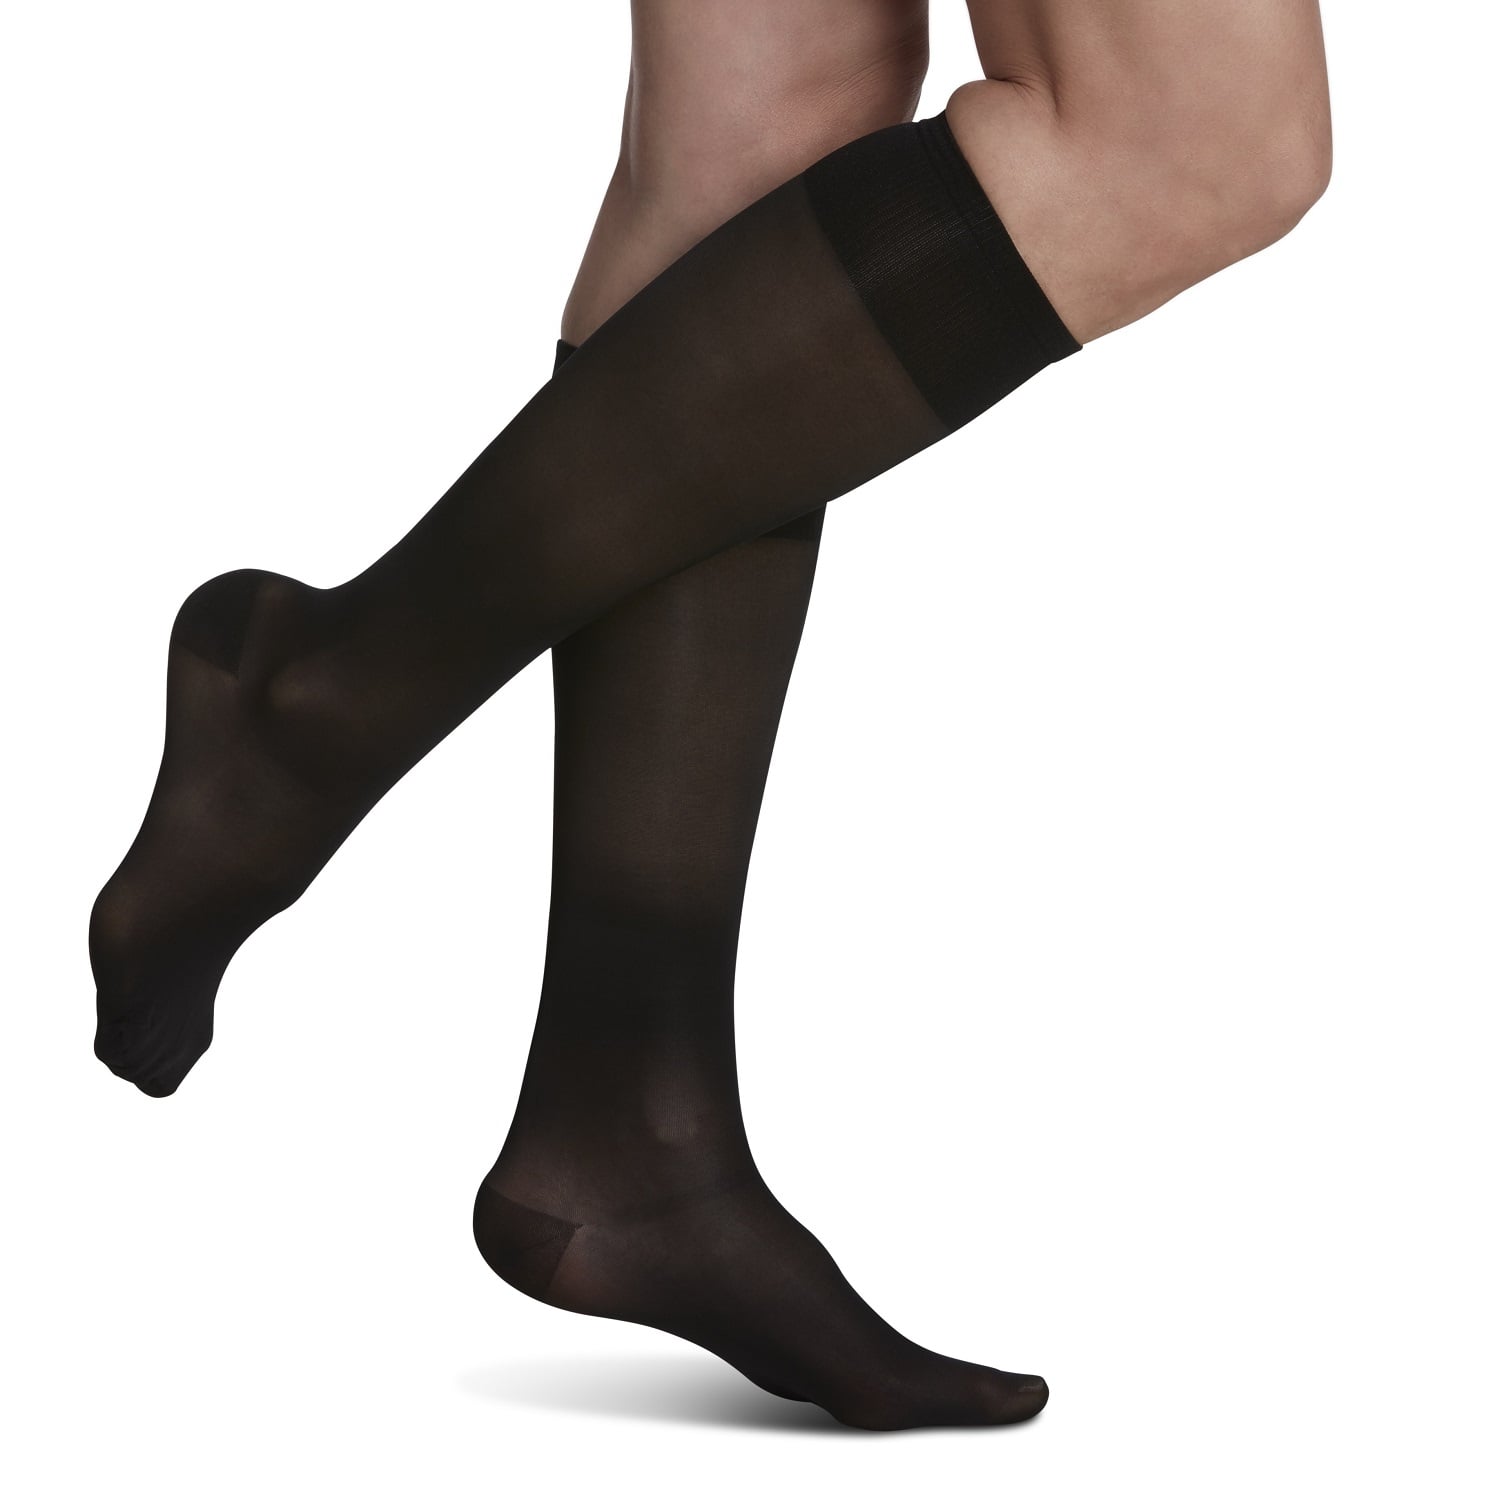 Knee High Compression Stockings, Firm Support 20-30mmHg Opaque